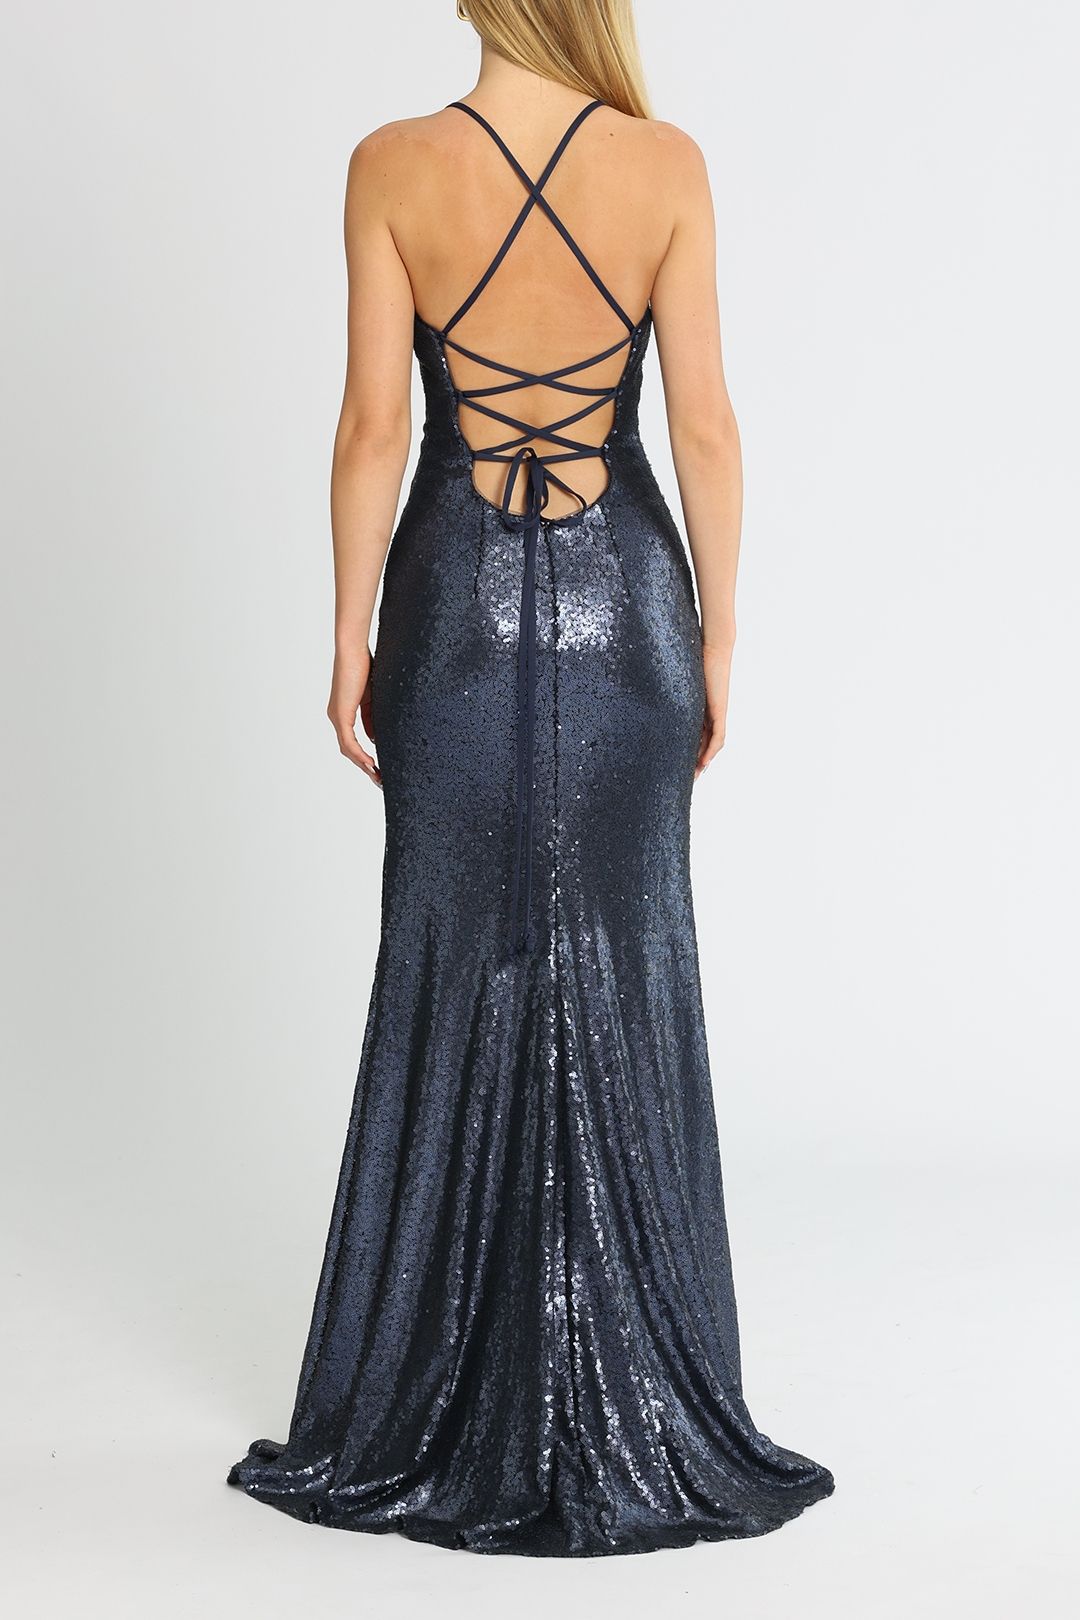 Tania Olsen India Gown Navy Backless